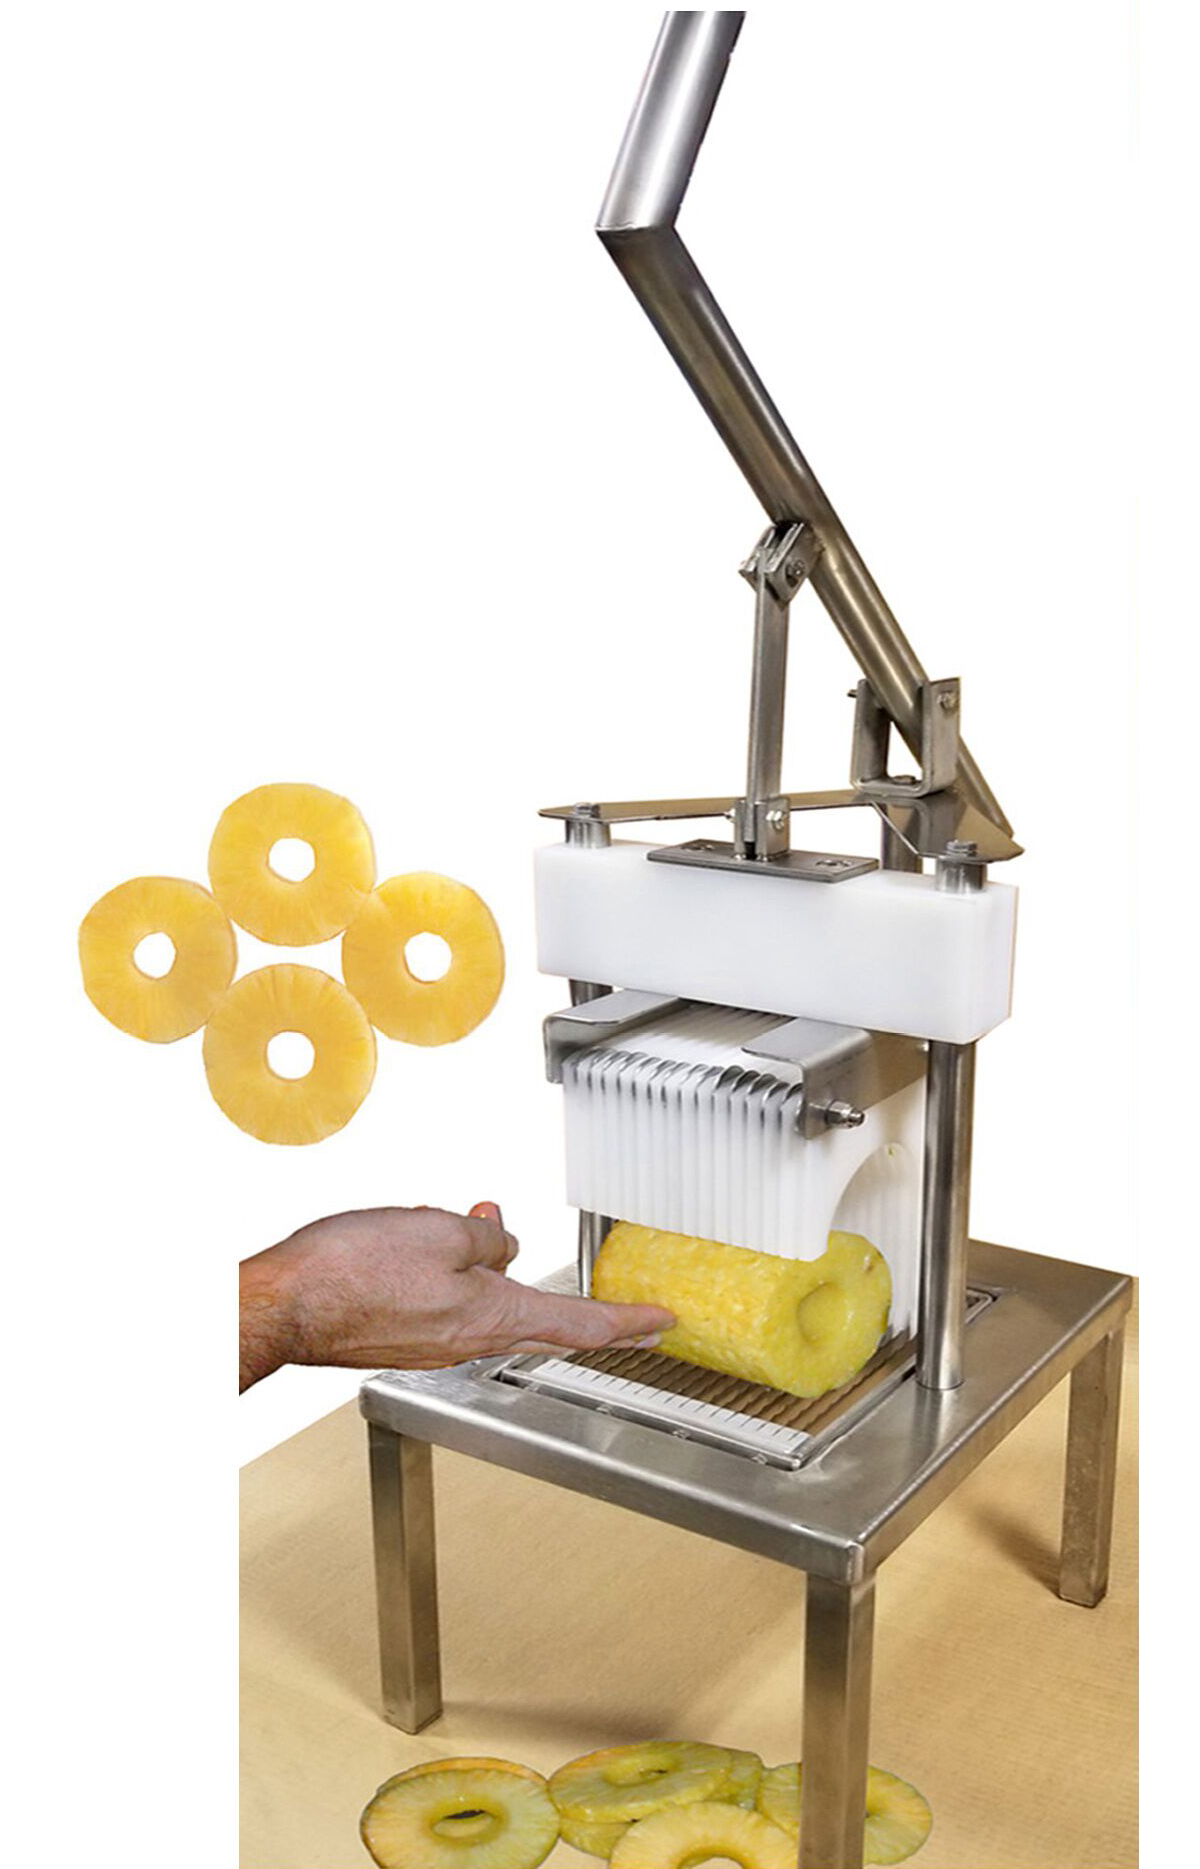 Onion Rings Cutting Machine/ Compact Onion Cutter Machine [How Onion Rings  are Cut] - YouTube